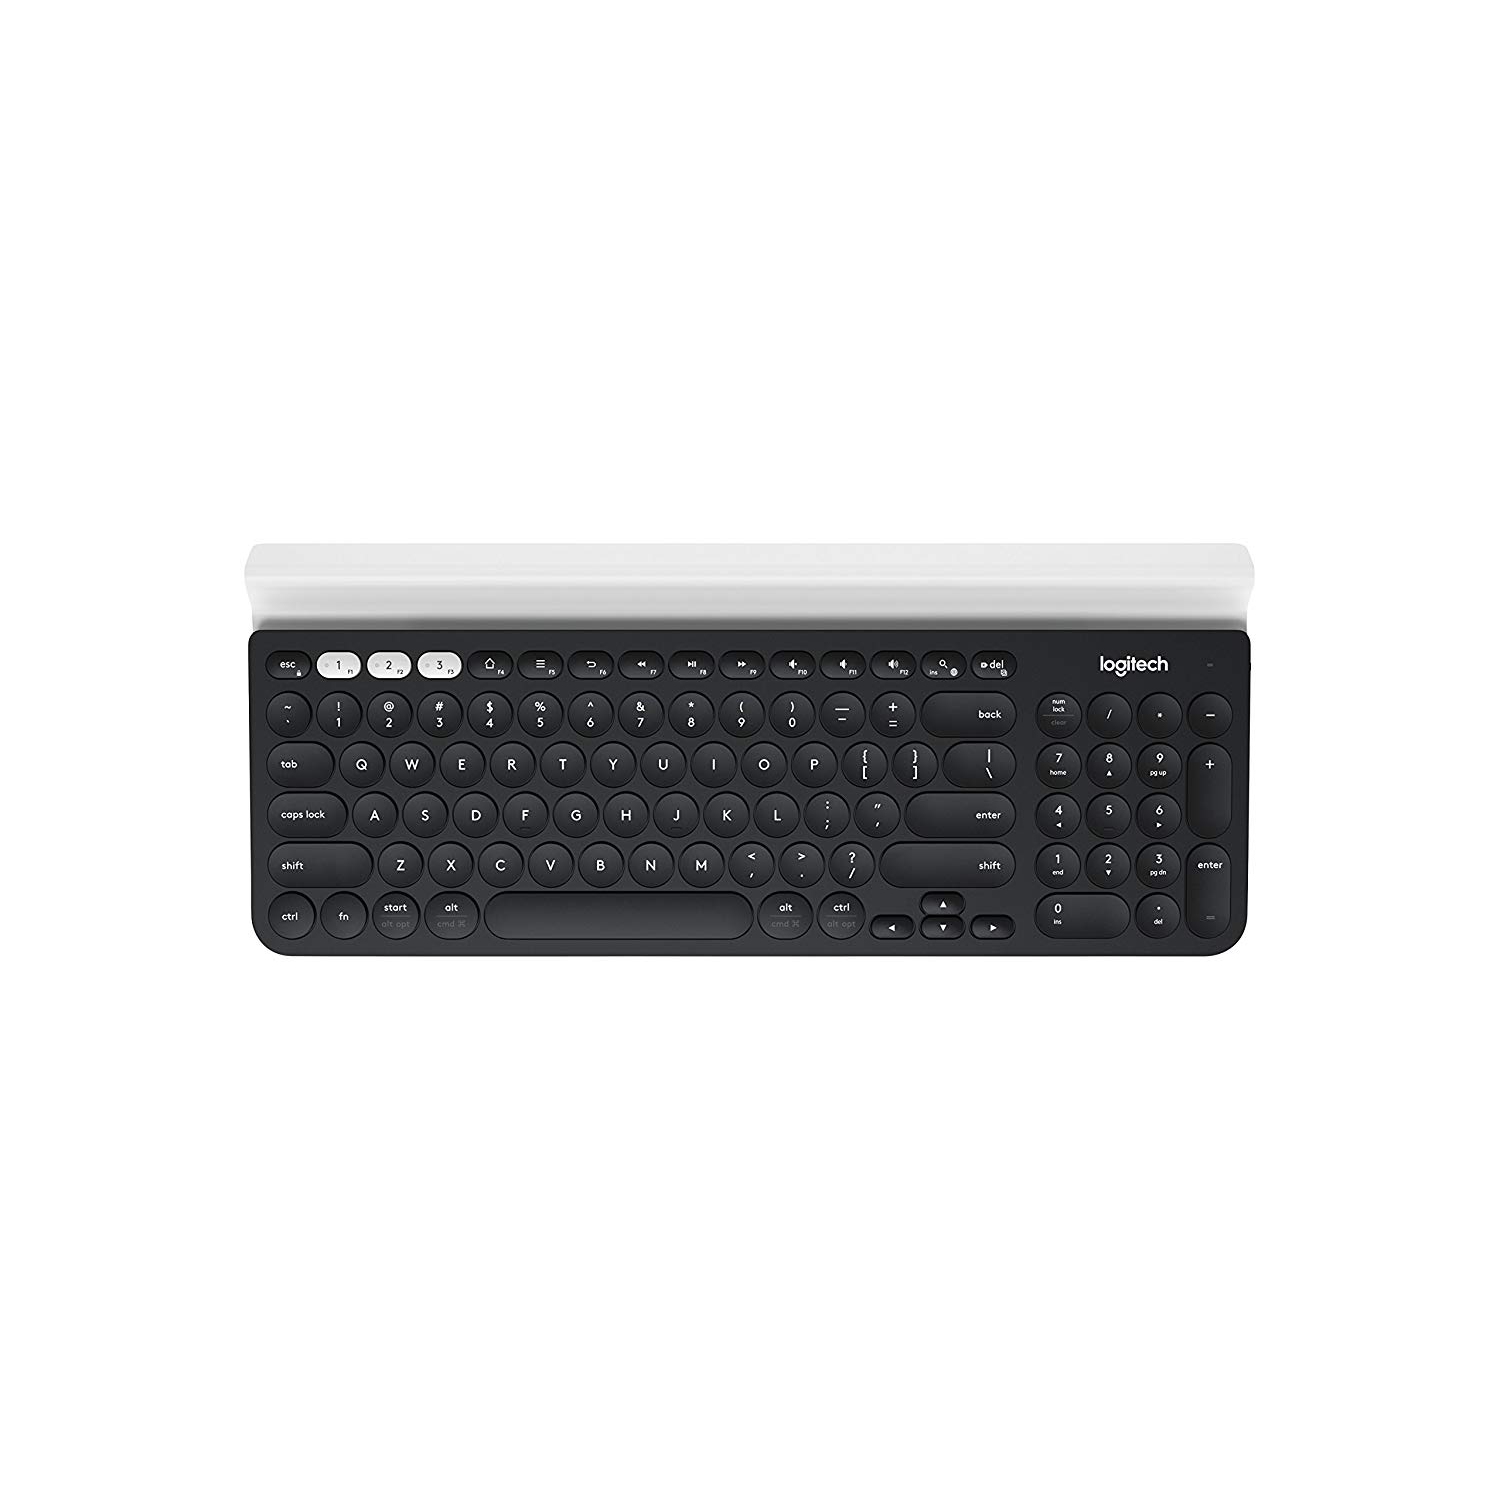 Logitech K780 Multi-Device Wireless Keyboard for Computer, Phone and Tablet FLOW Cross-Computer Control Compatible